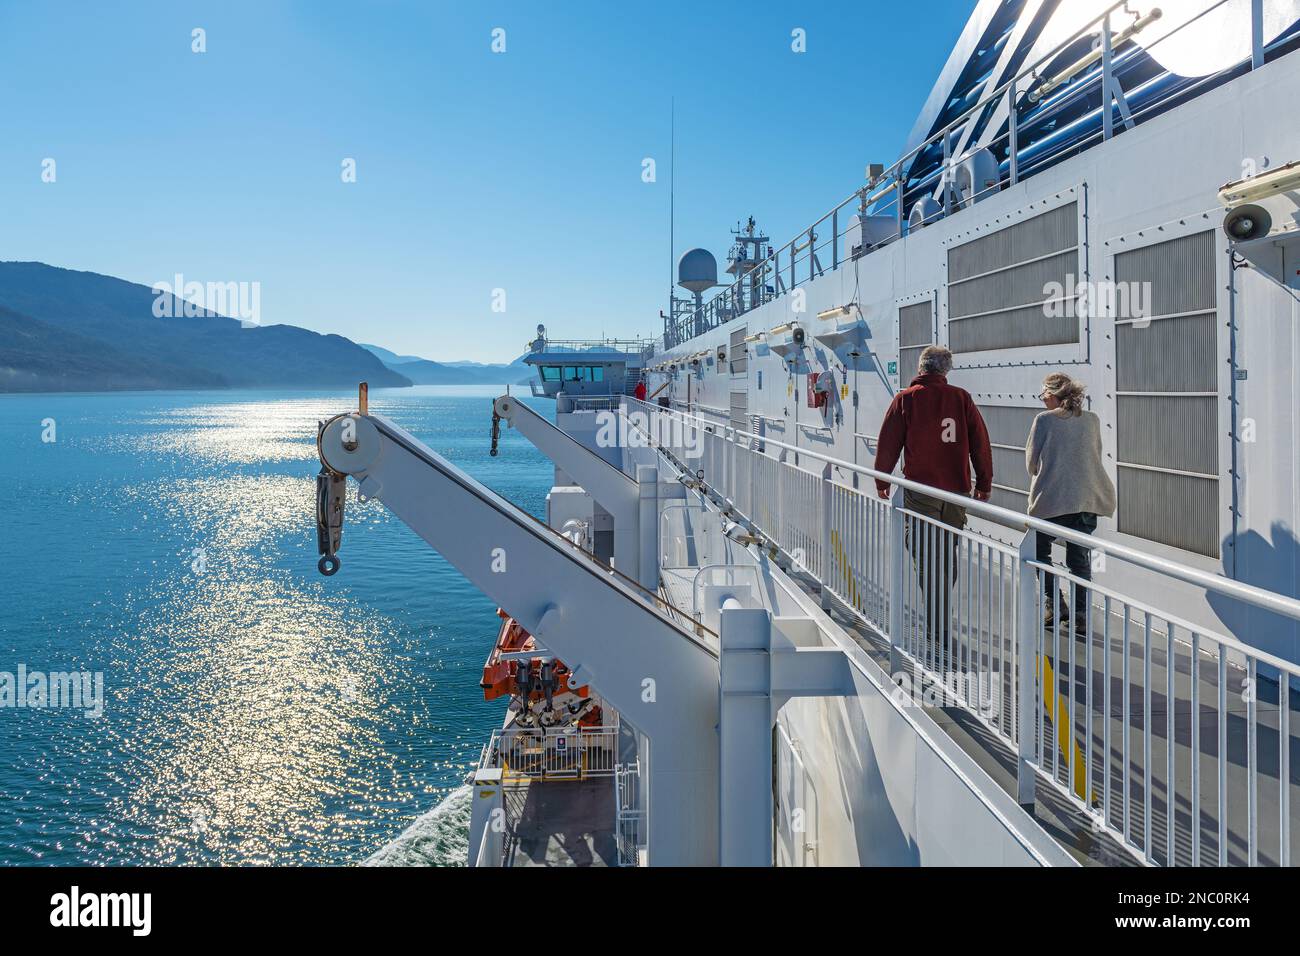 Tourist people walking on deck of a cruise ferry ship along the Inside Passage between Prince Rupert and Port Hardy, British Columbia, Canada. Stock Photo